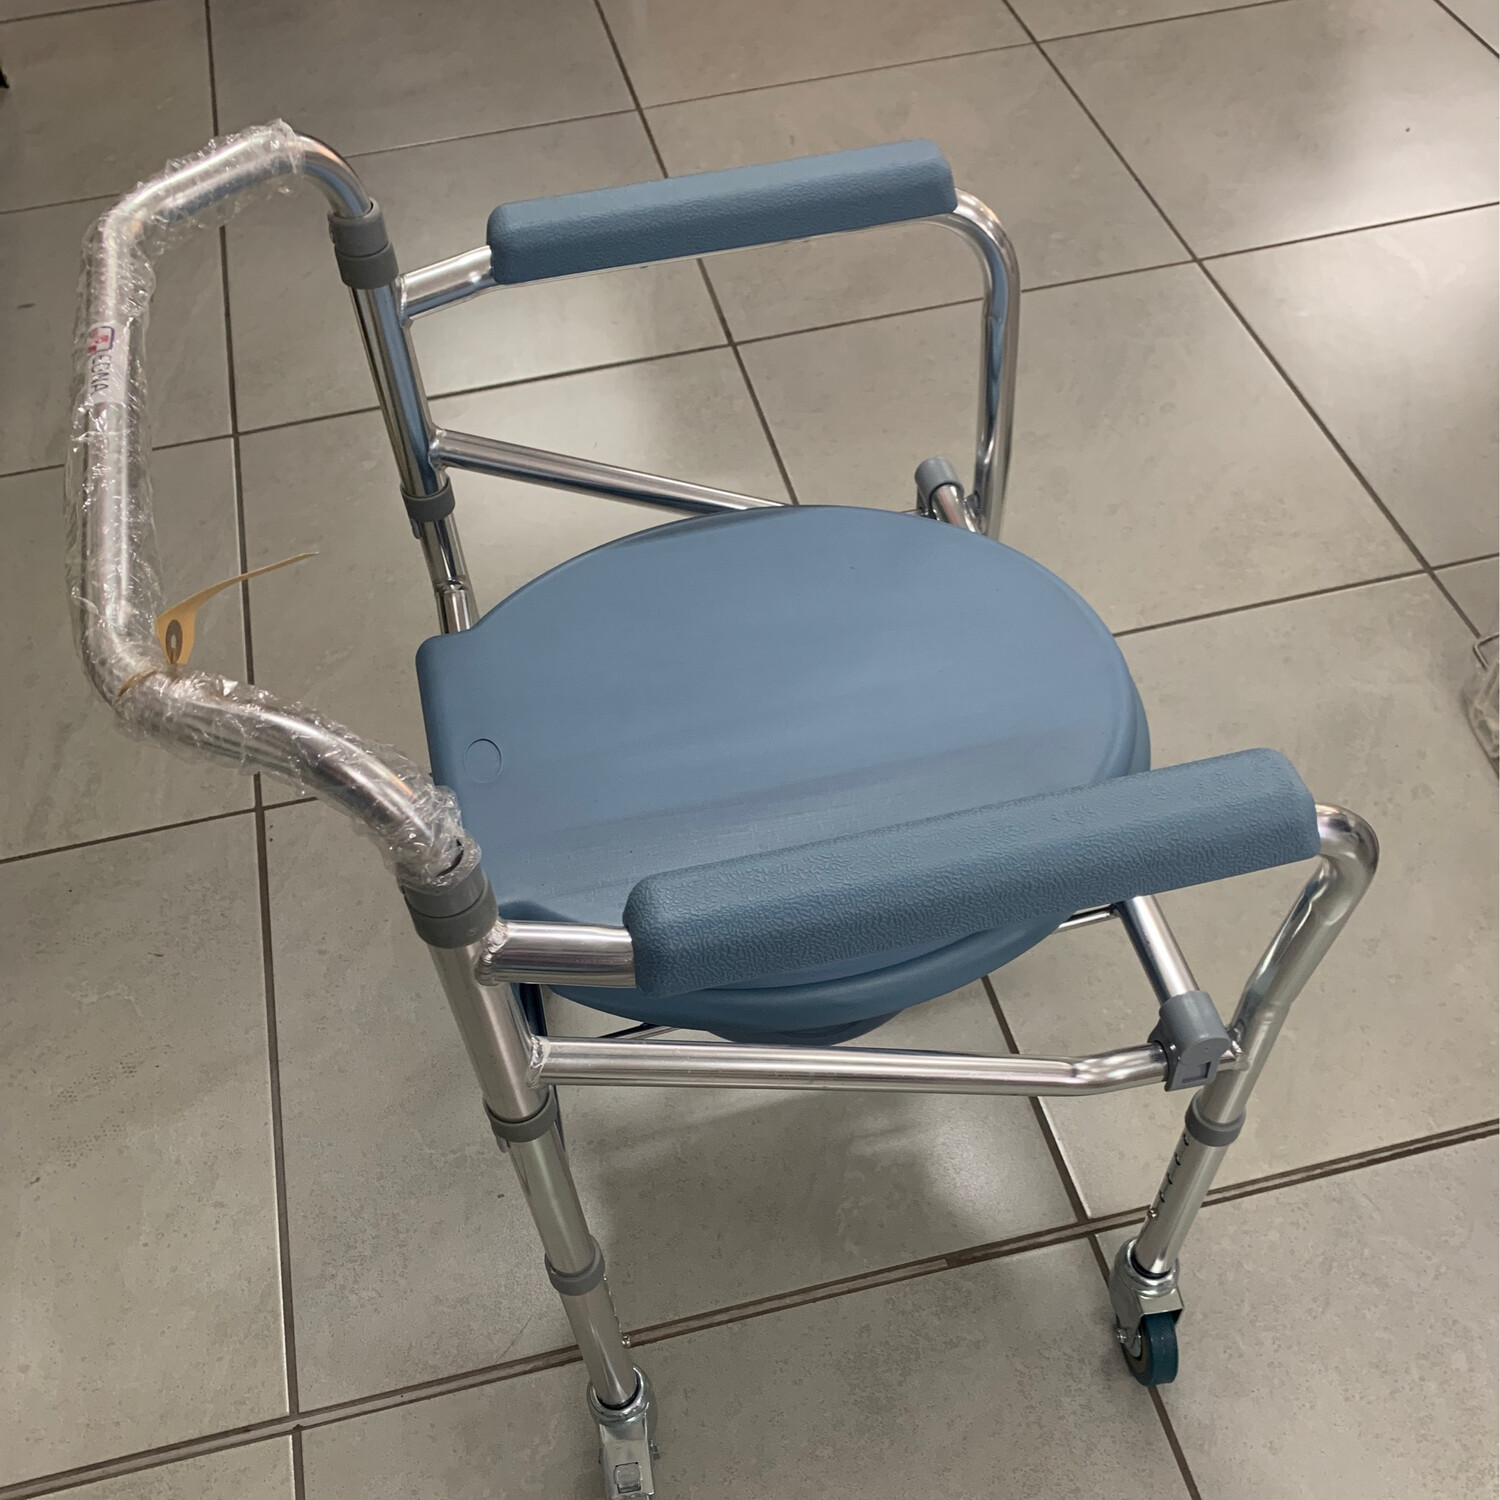 Commode chair with wheels